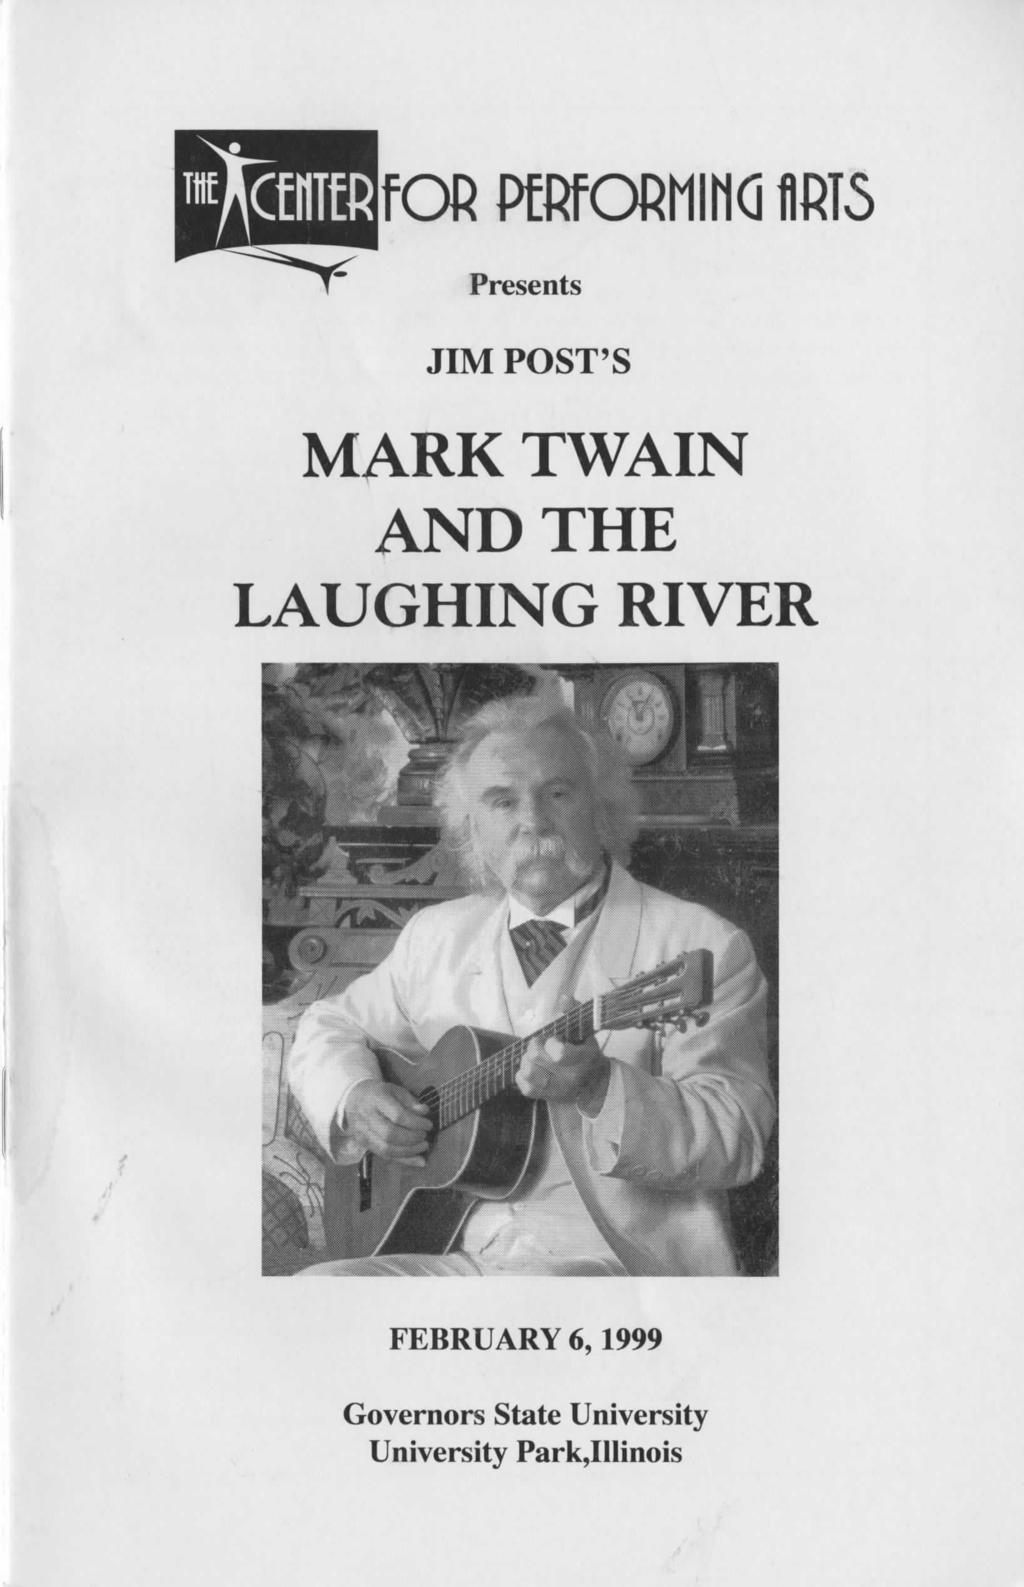 for PERfORHINQ flr15 Presents JIM POST'S MARK TWAIN AND THE LAUGHING